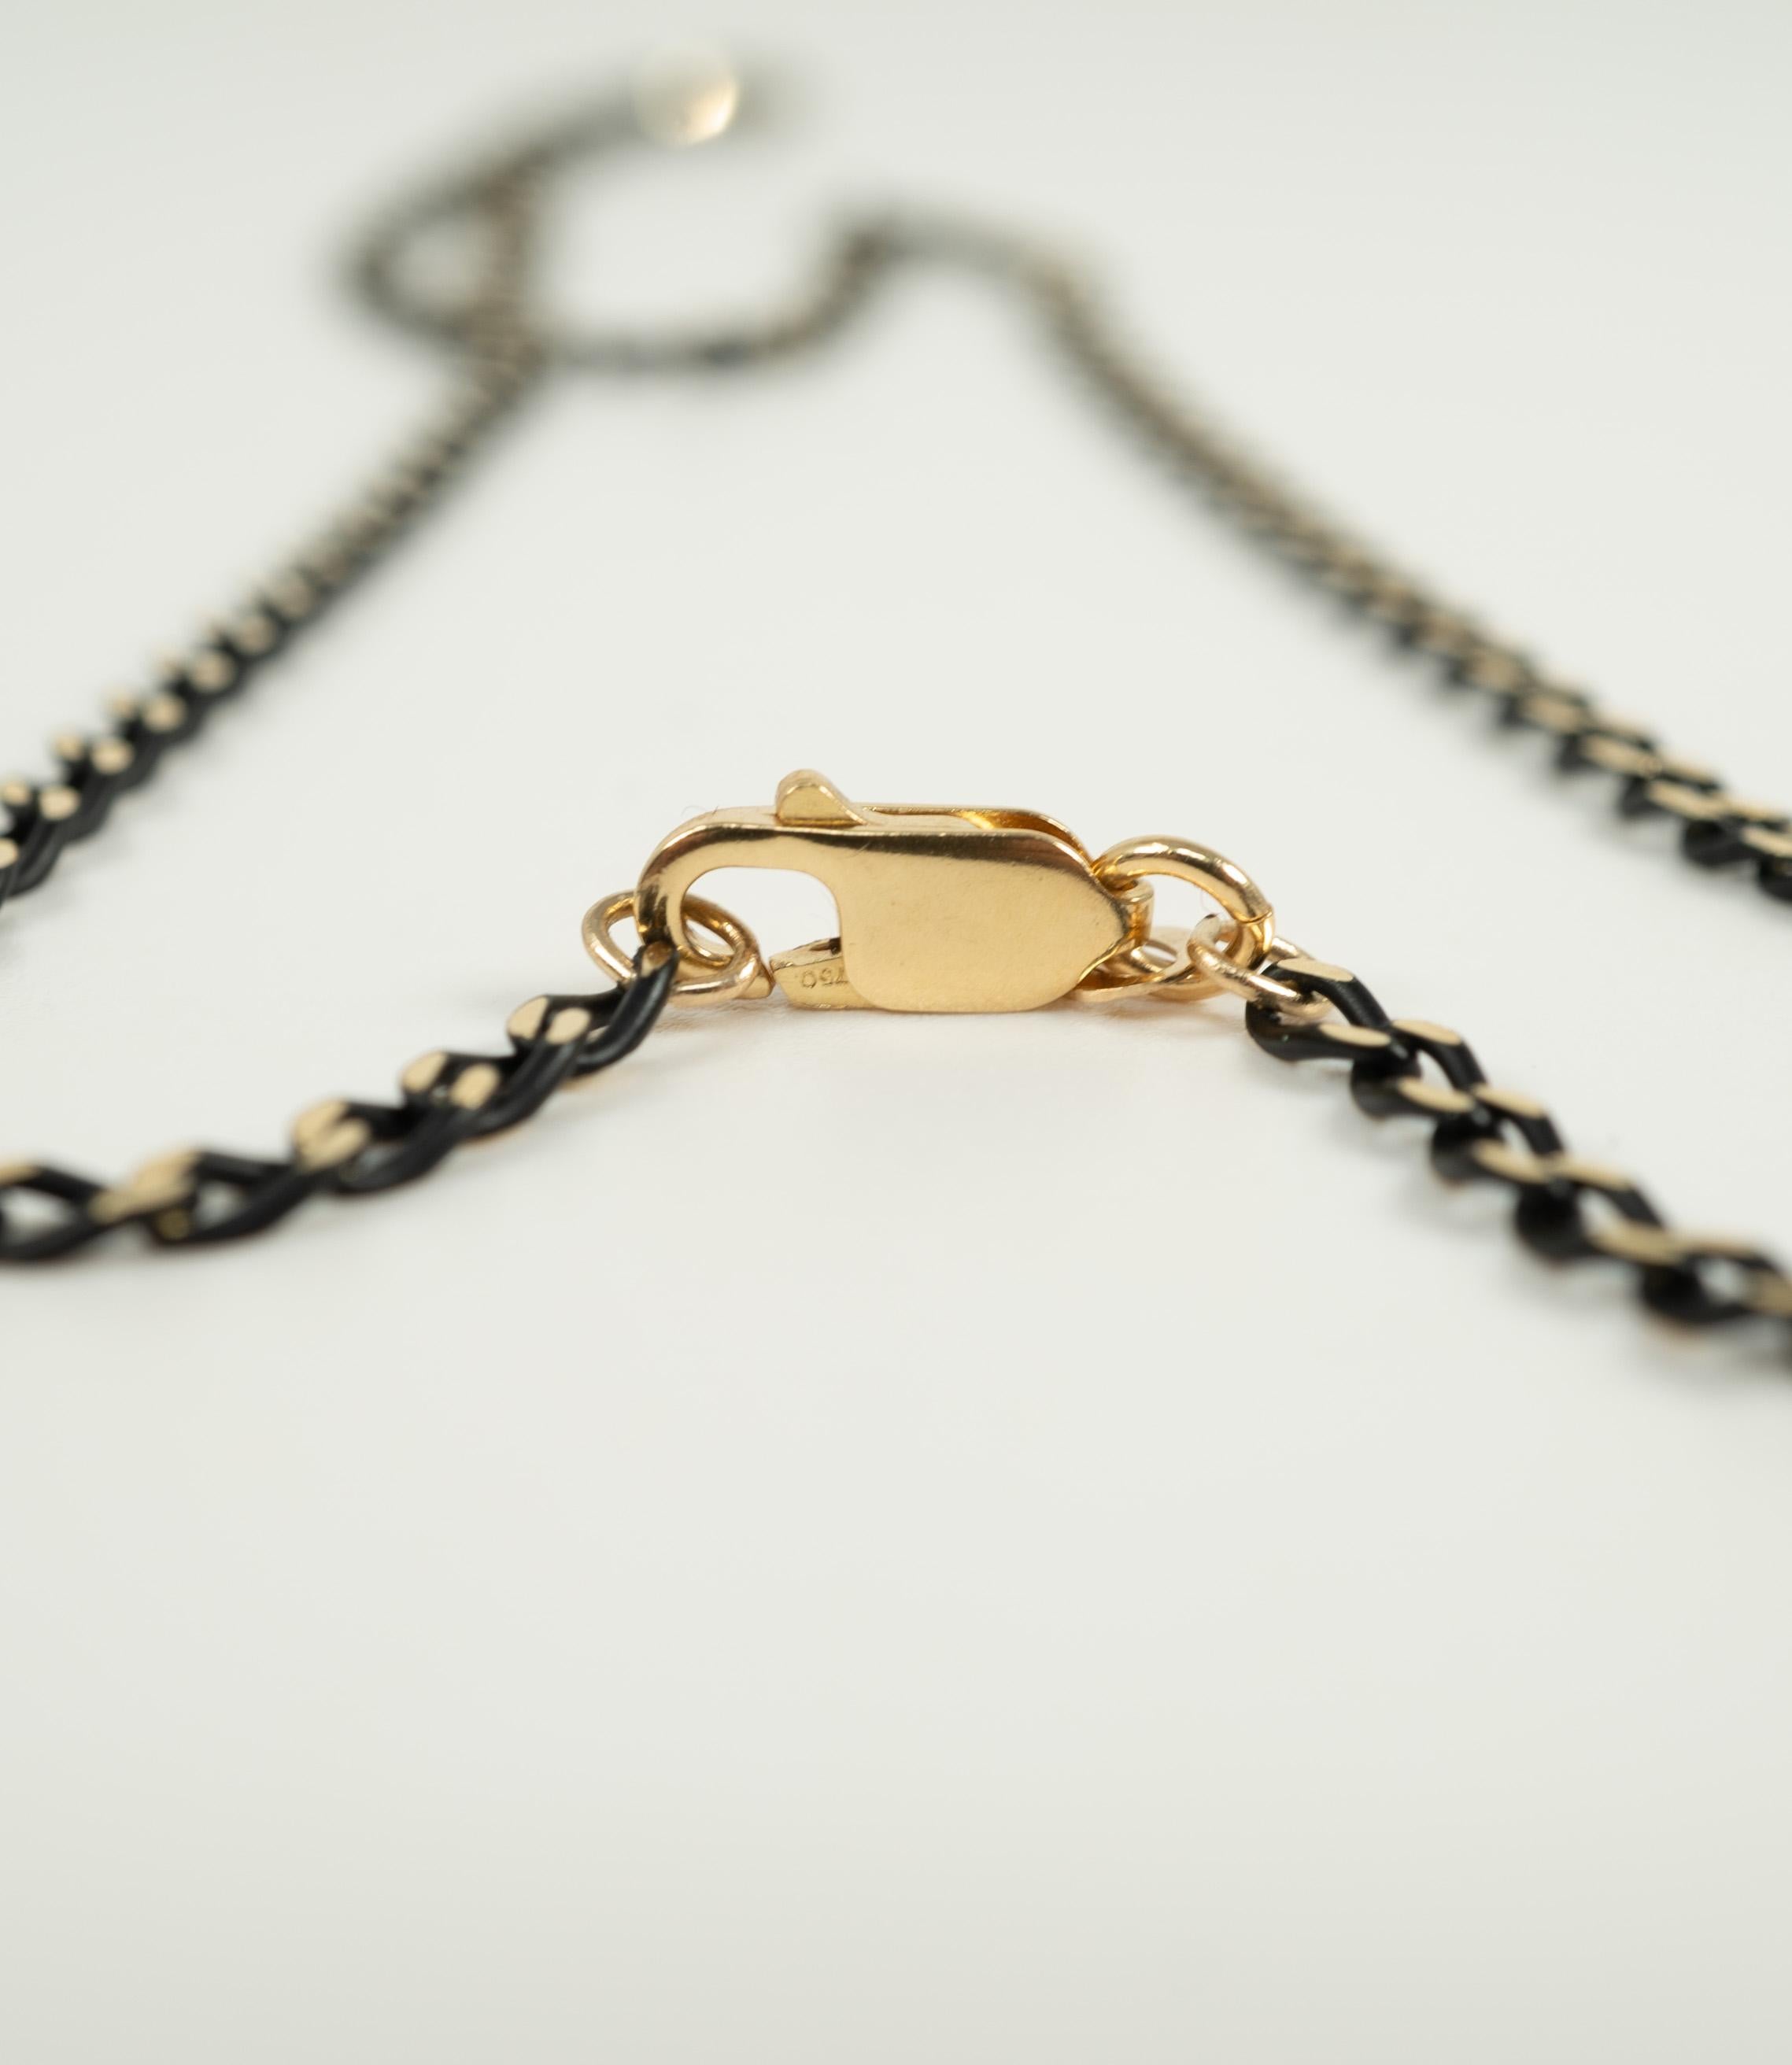 In 18 karat black and yellow gold, secured with a lobster clasp.